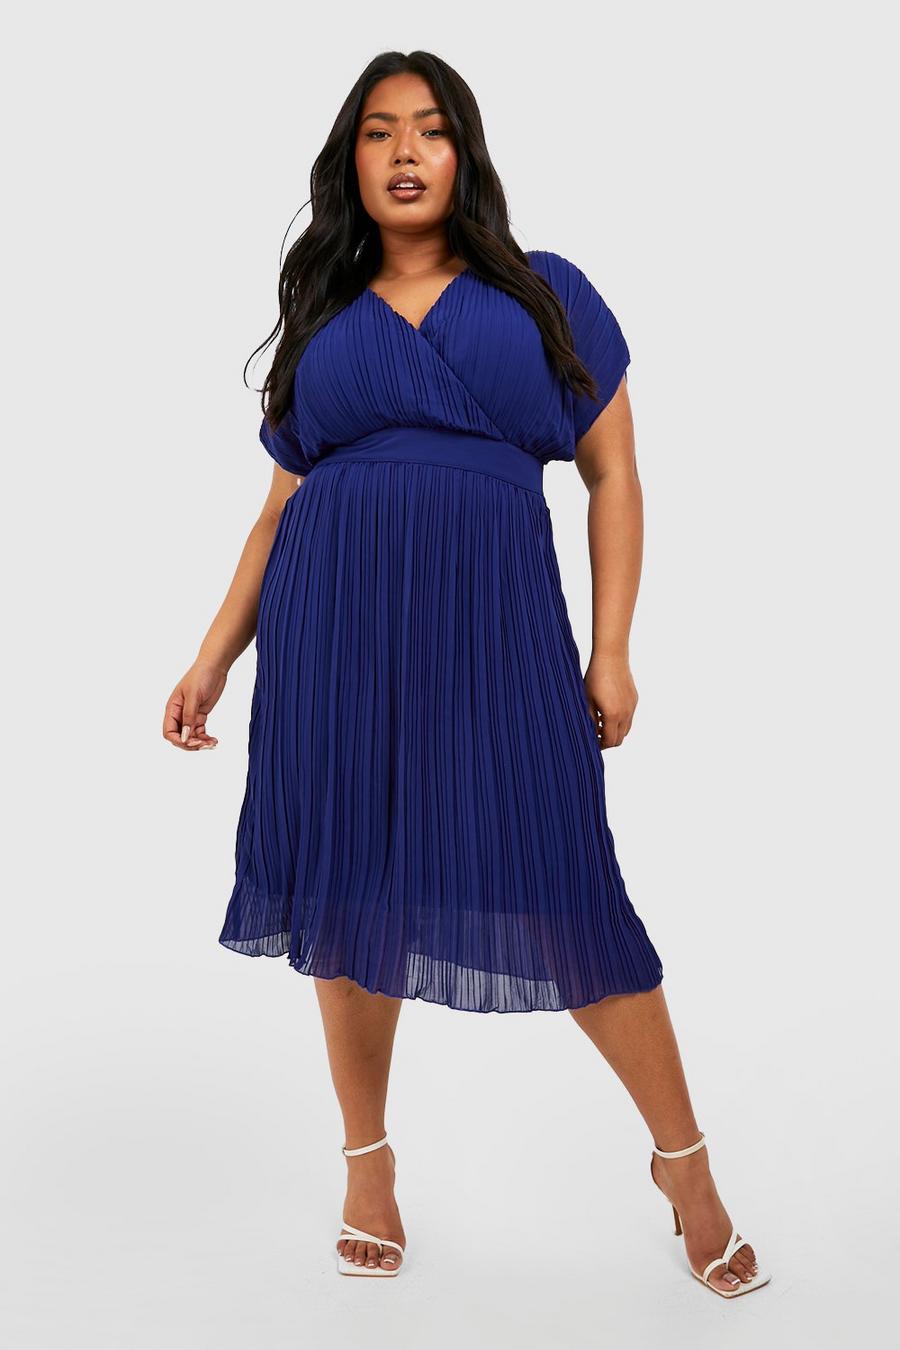 SHEIN FIT+ Plus Off Shoulder Pleated Dress  Yellow plus size dresses,  Pleated dress, Yellow formal dress